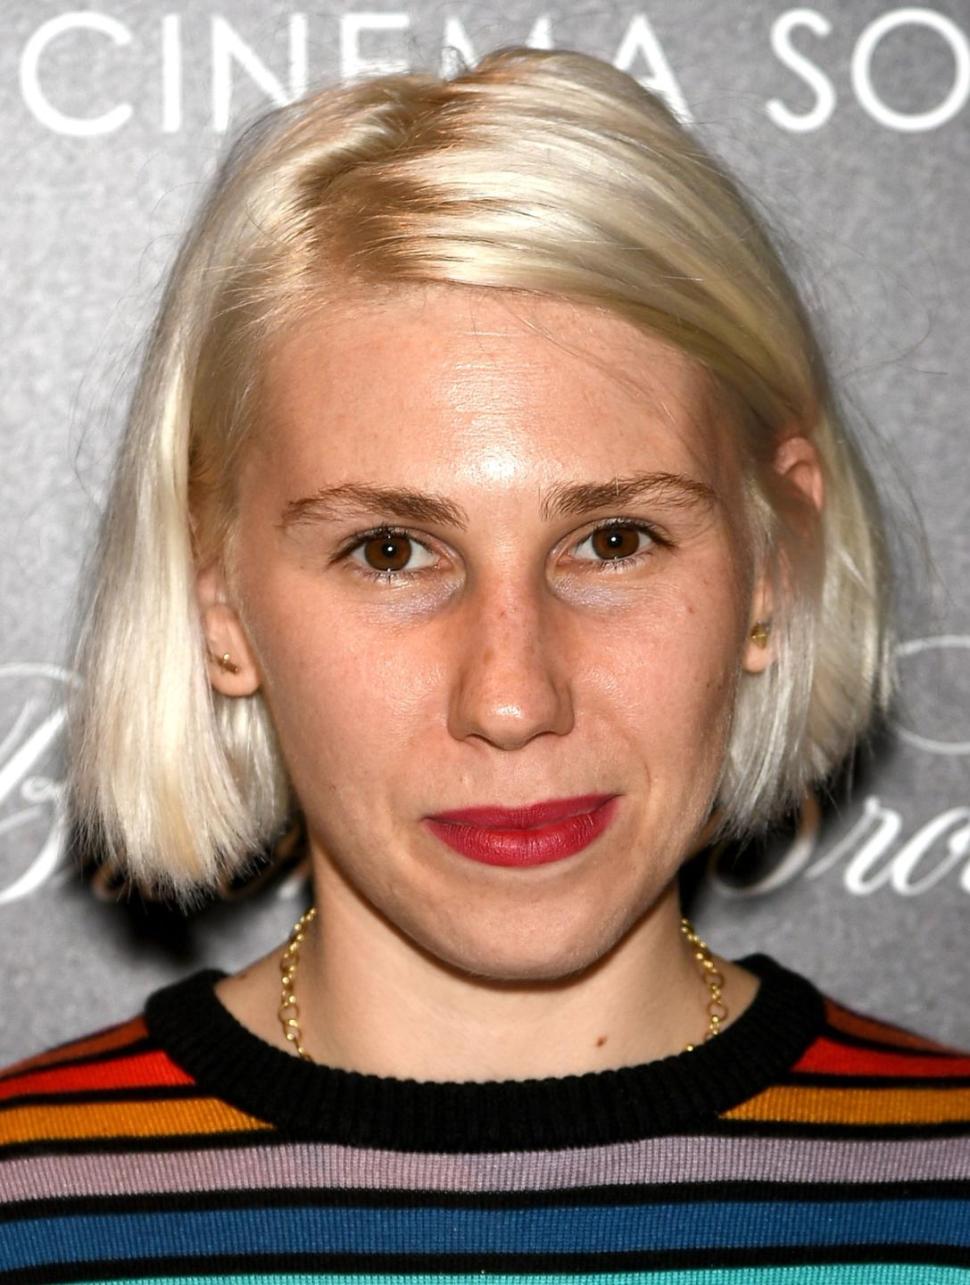 'Girls' actress Zosia Mamet, 26,  has dyed her hair 'old-lady gray.'